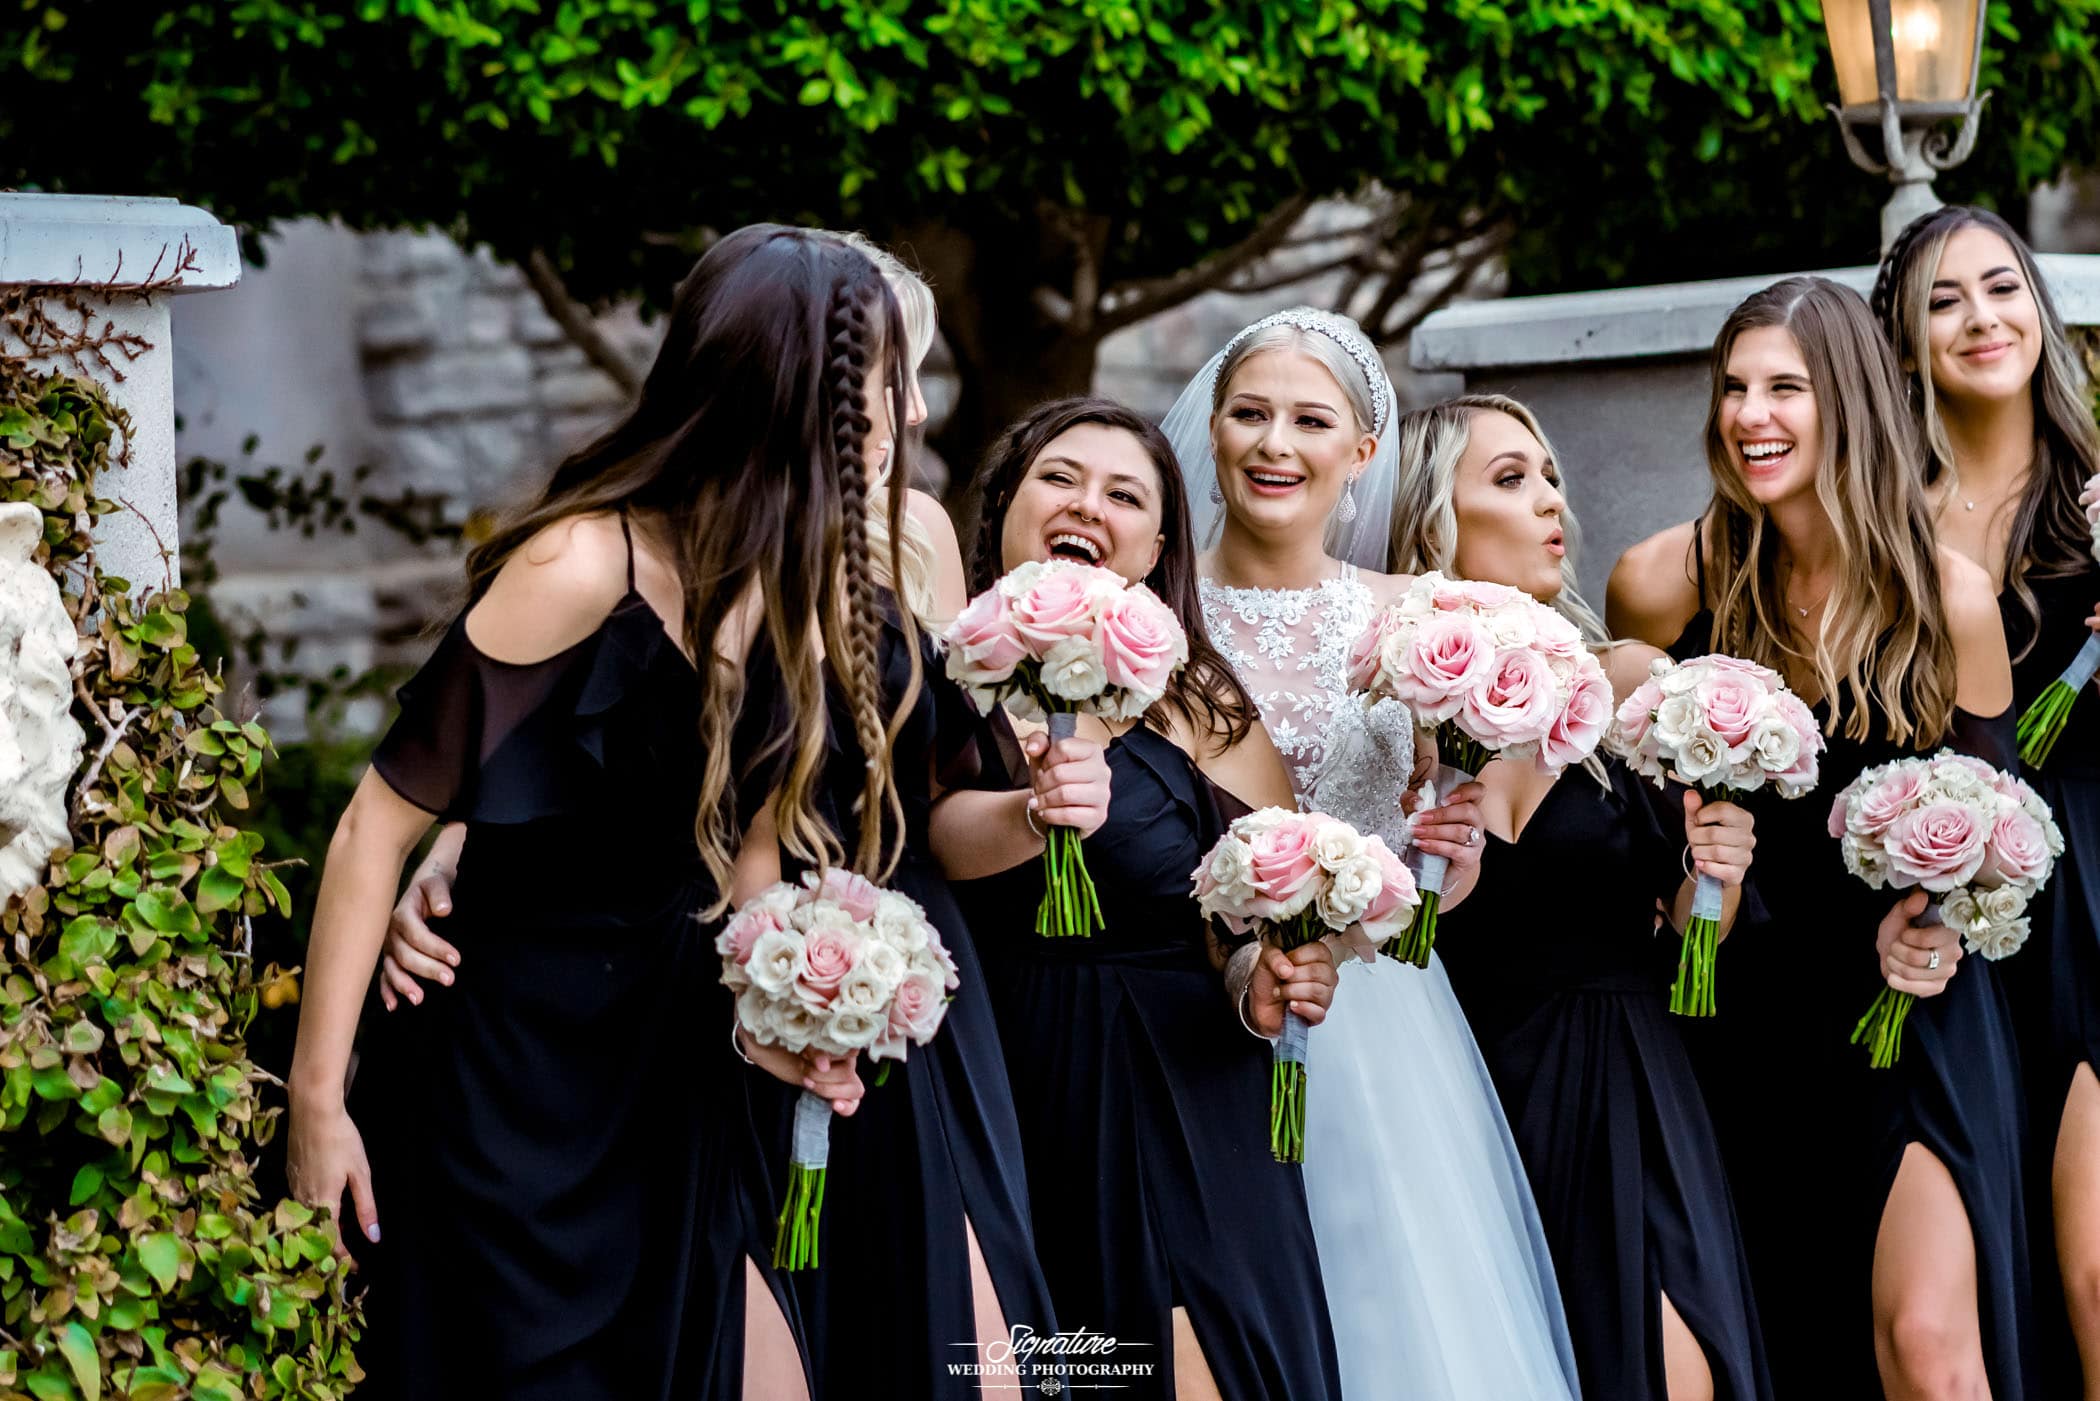 Bride and bridesmaids smiling at each other